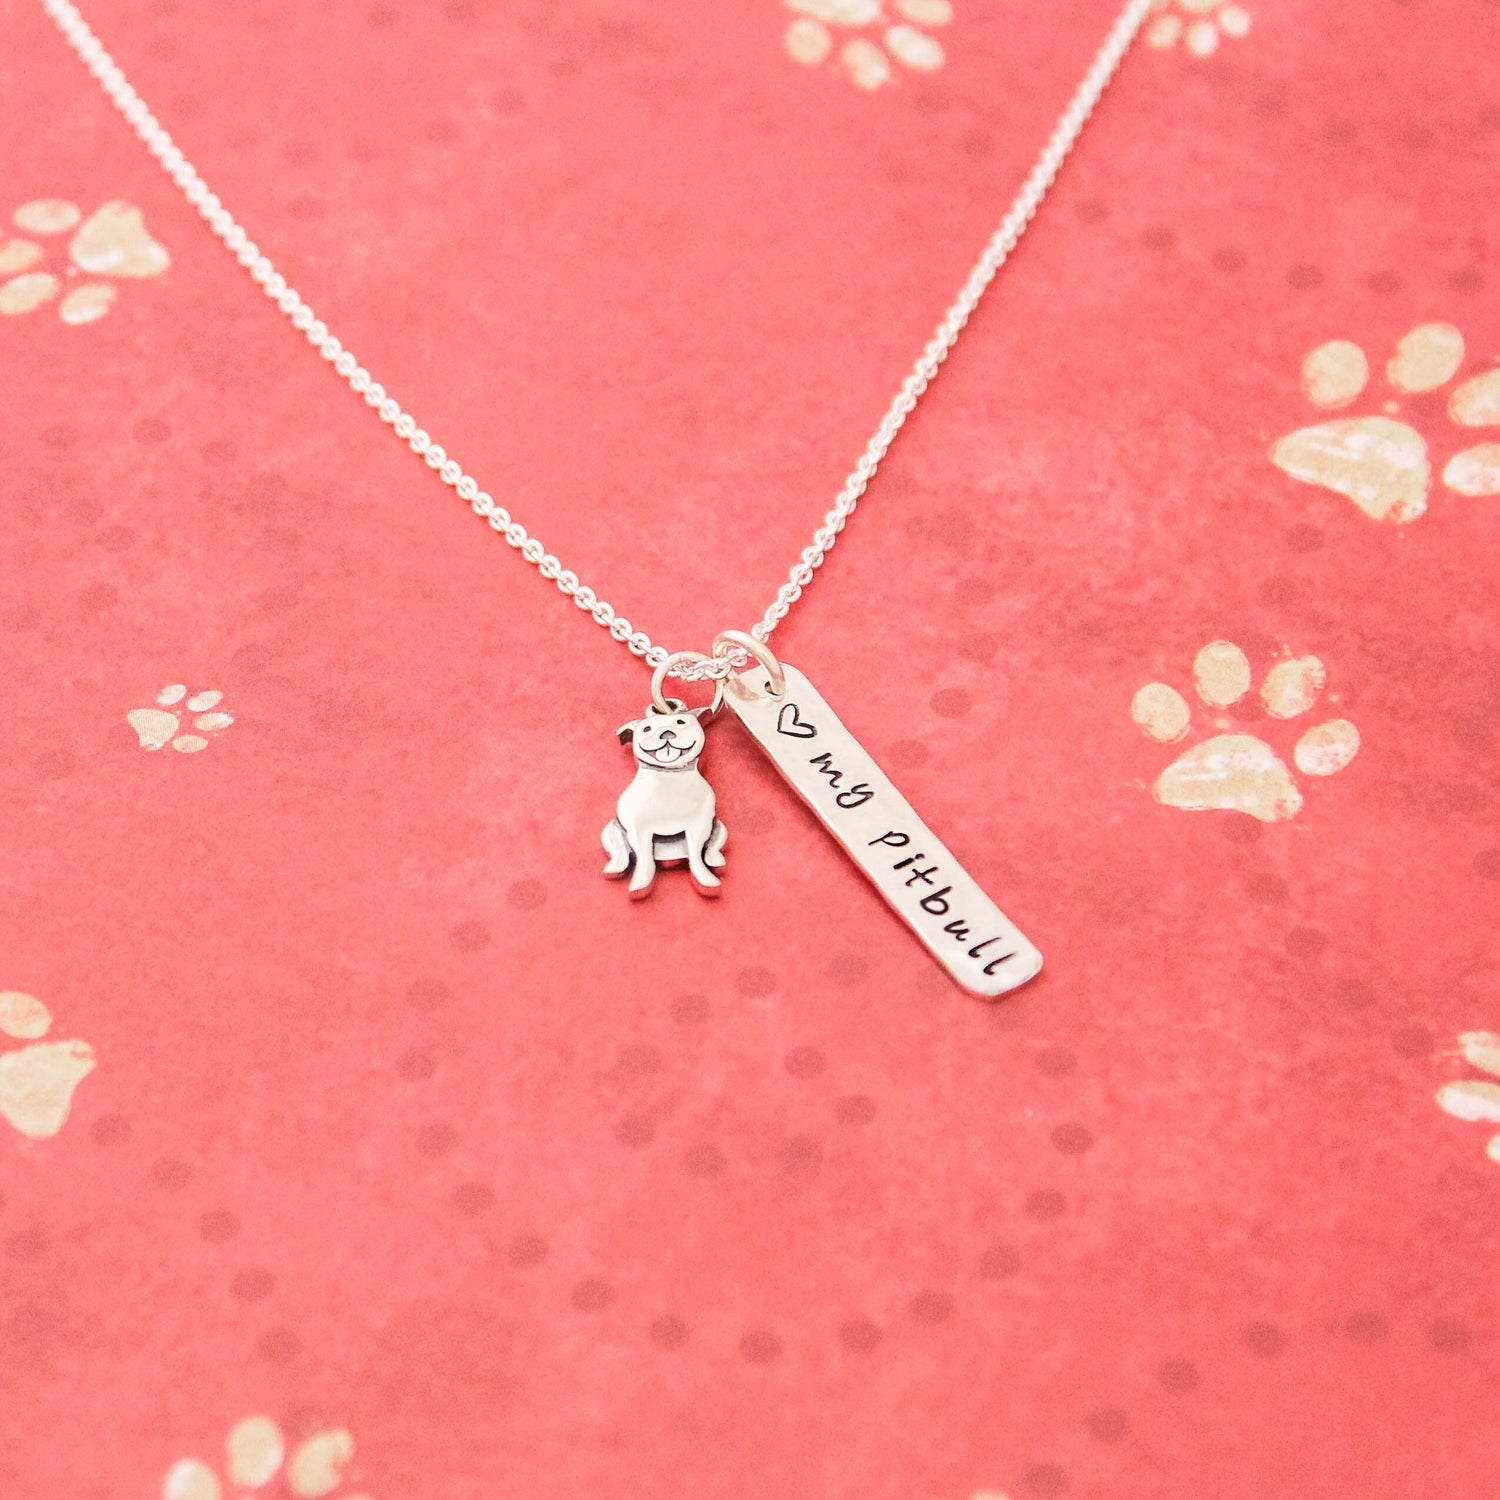 LOVE my PITBULL Necklace, Sterling Silver Pitbull Dog Necklace, Pitbull Lover Gift, New Pet Gift, Pitbull Jewelry, Hand Stamped Pitbull Gift